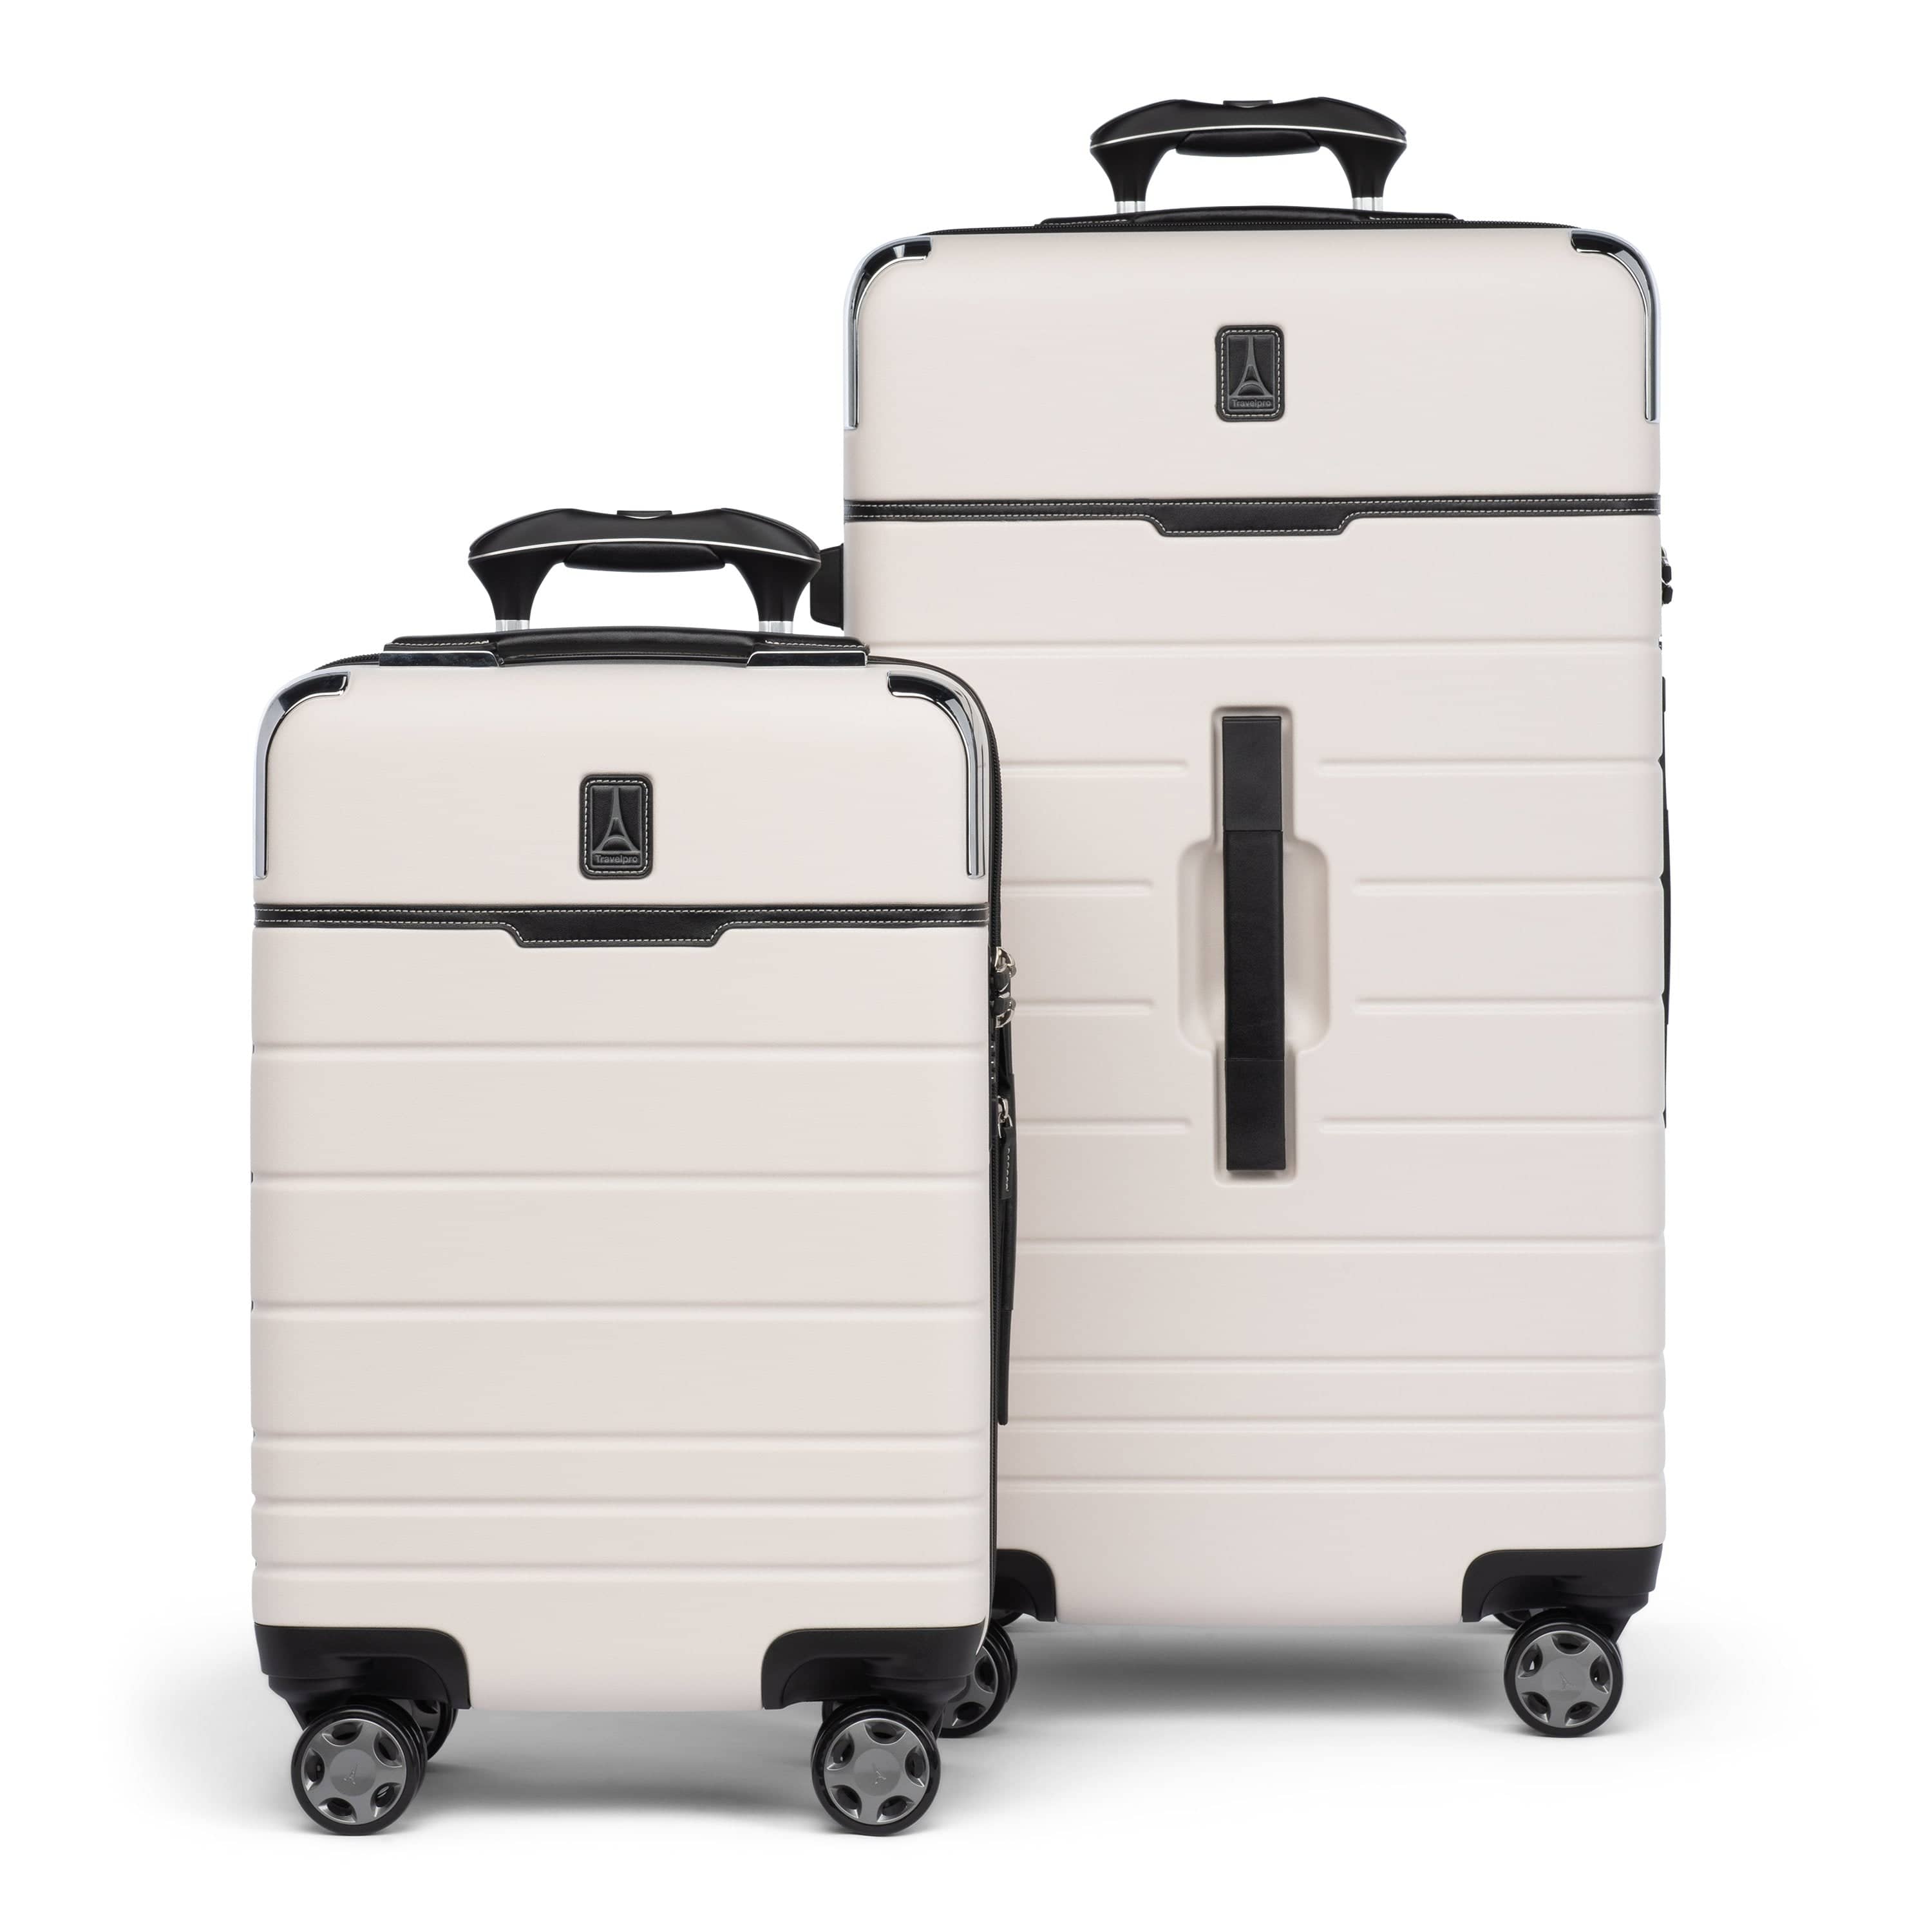 Travelpro® x Travel + Leisure® Compact Carry-on/Large Check-in Trunk Spinner - Luggage Set